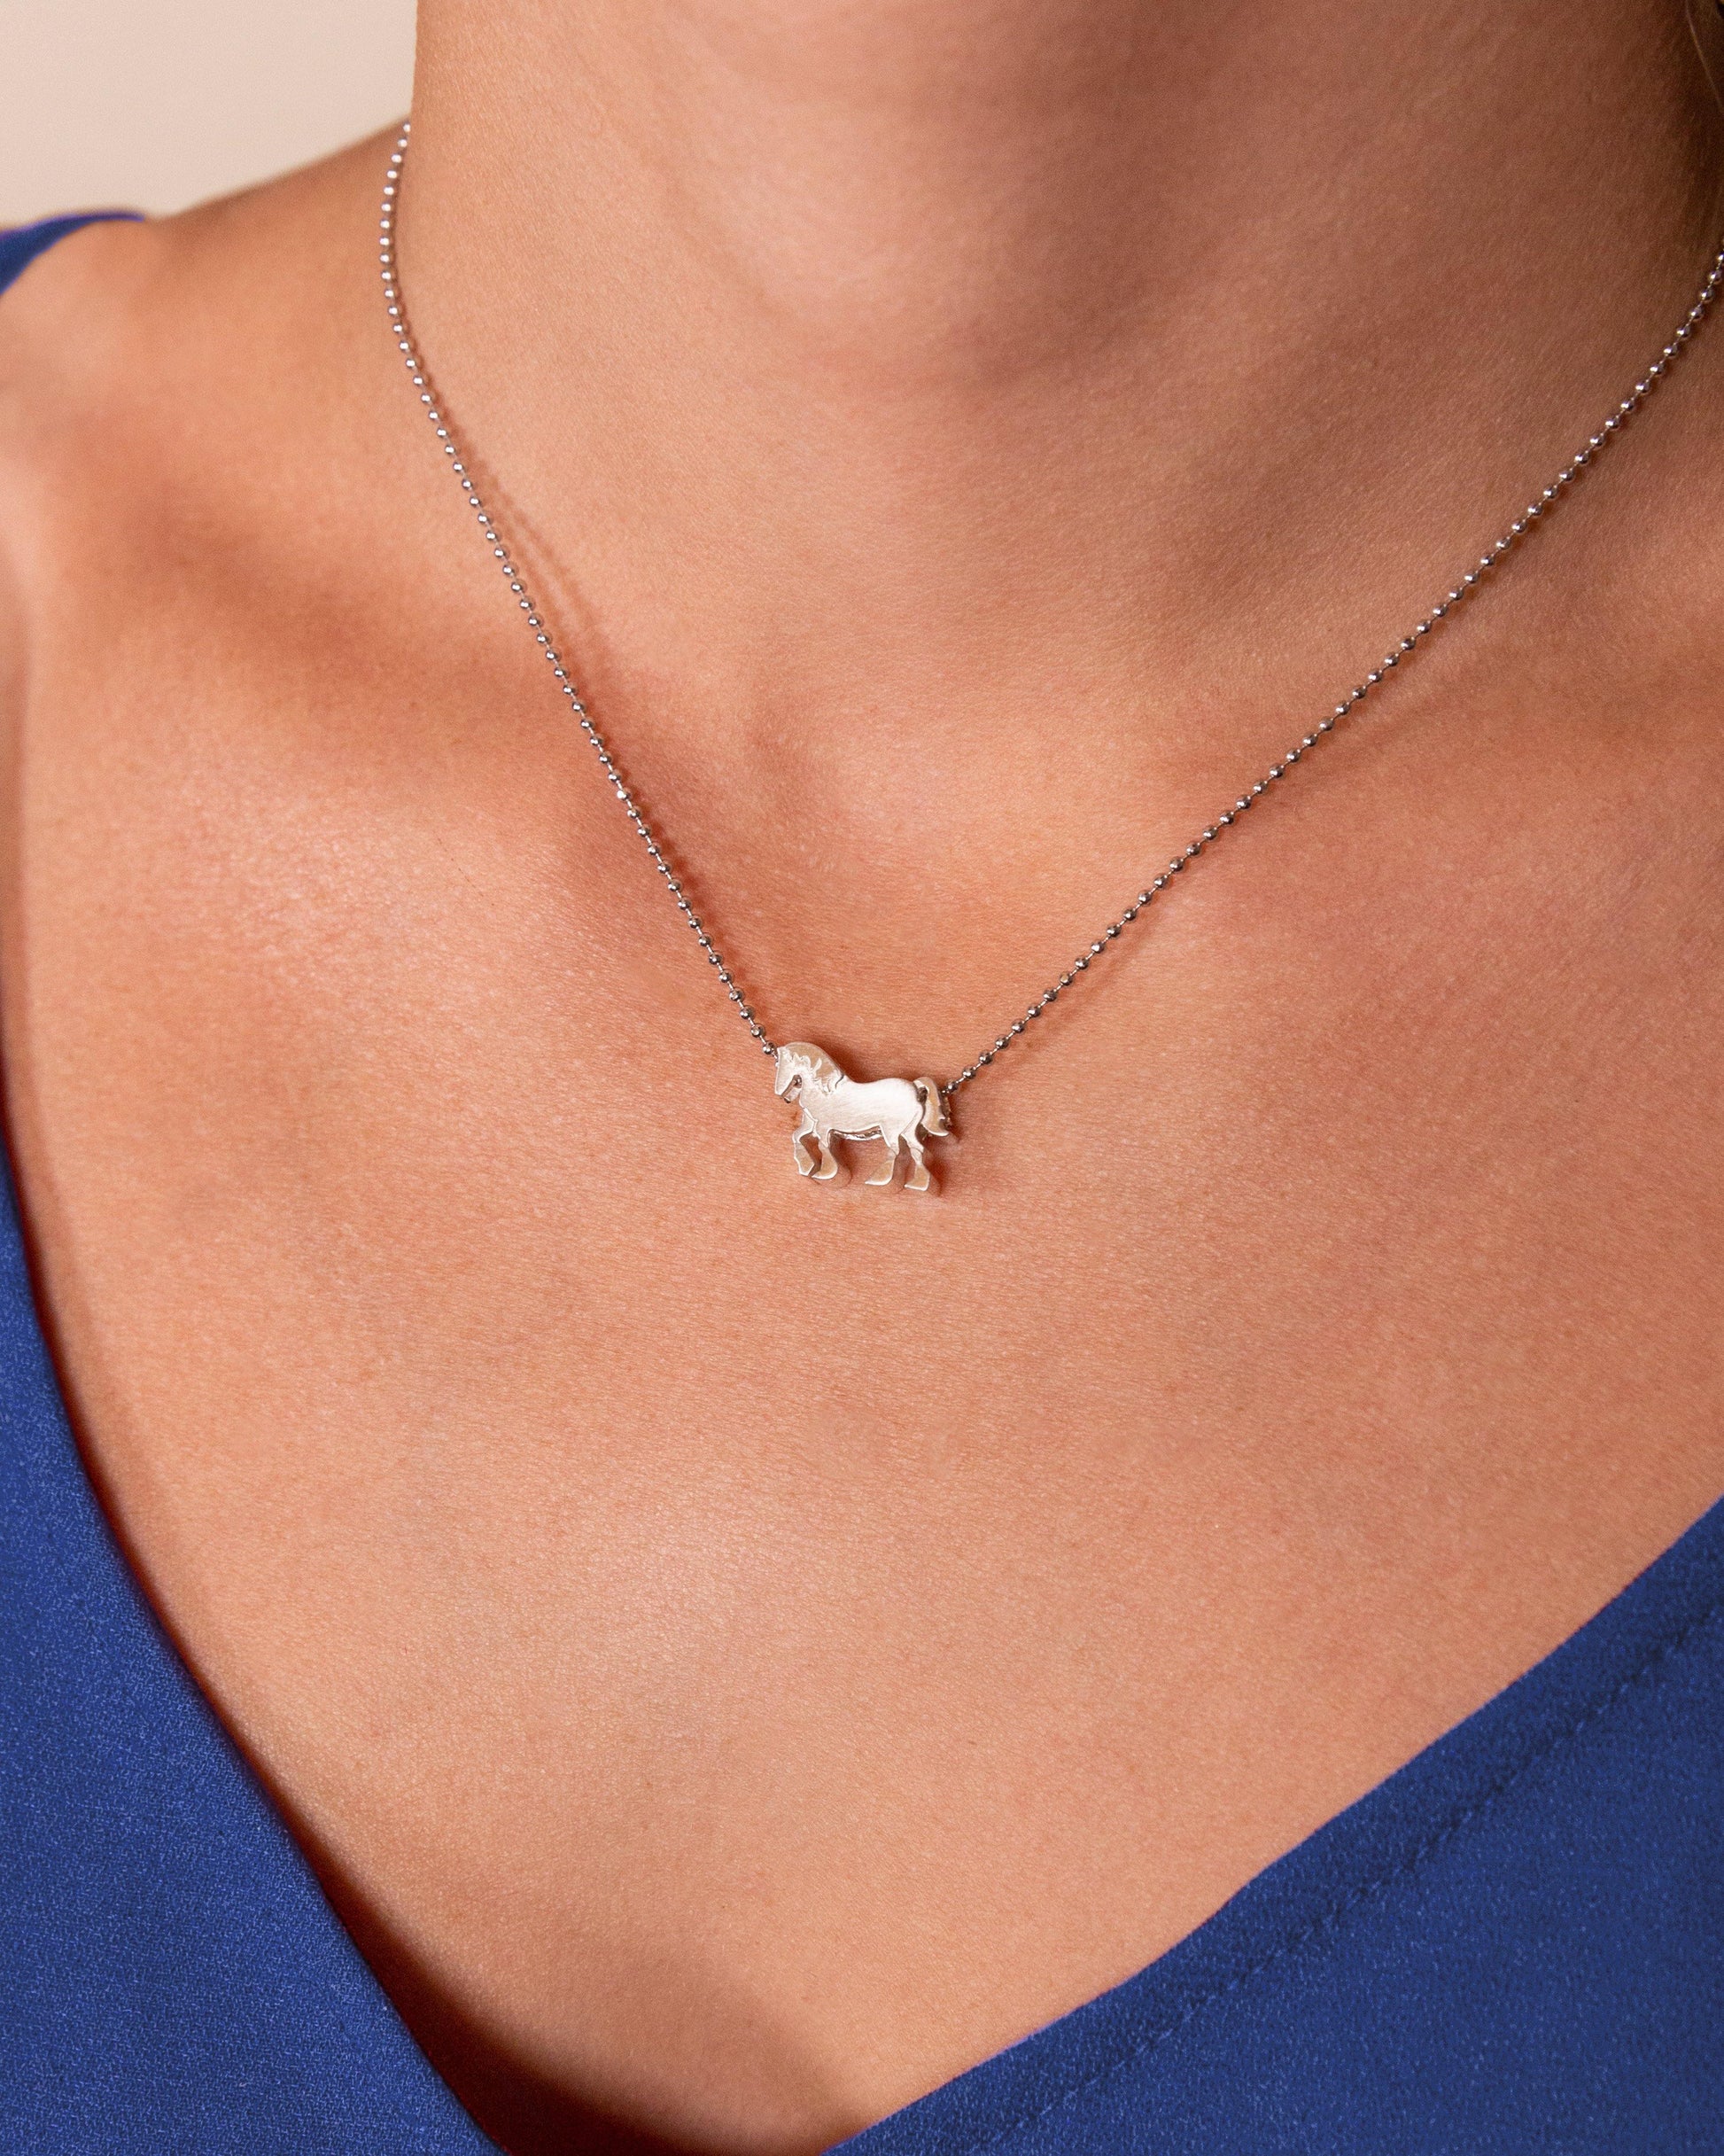 From Jewelry designer Alex Woo a 14 carat silver clydesdale necklace, 16 inches long